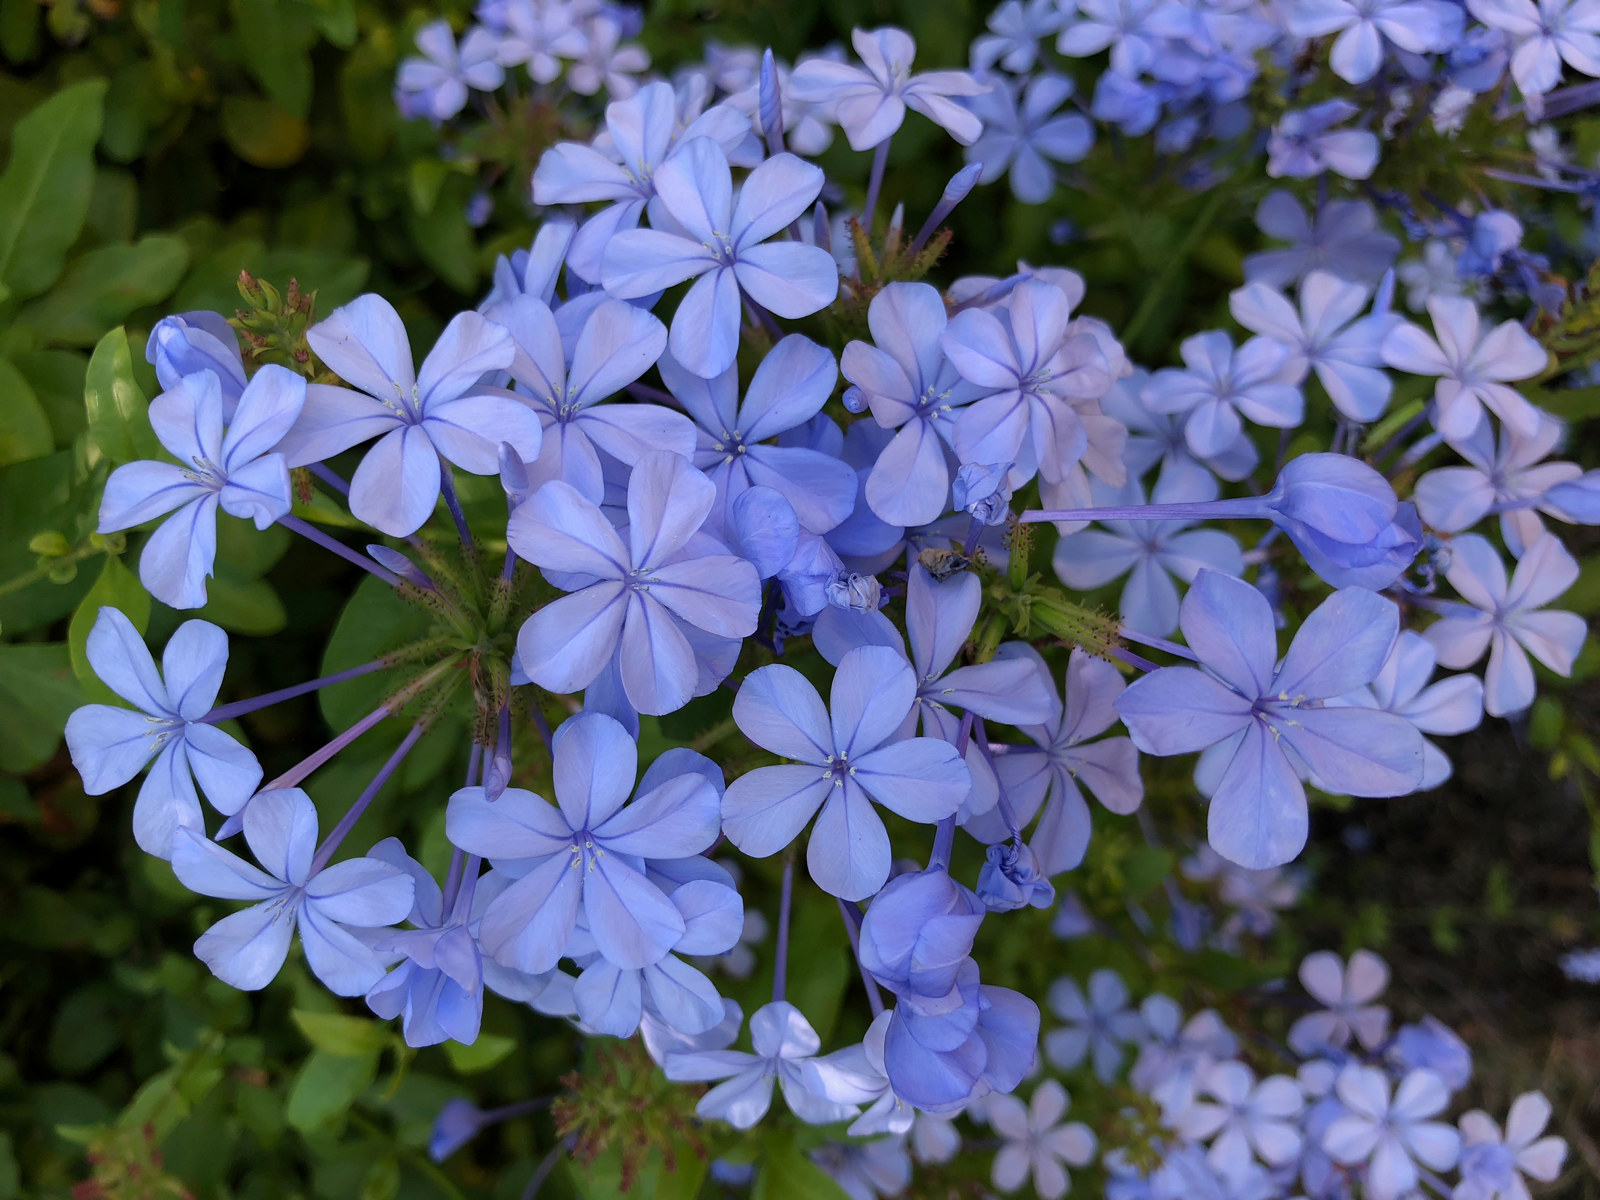 Plumbago (Plumbago capensis) in flower at Vaucluse House